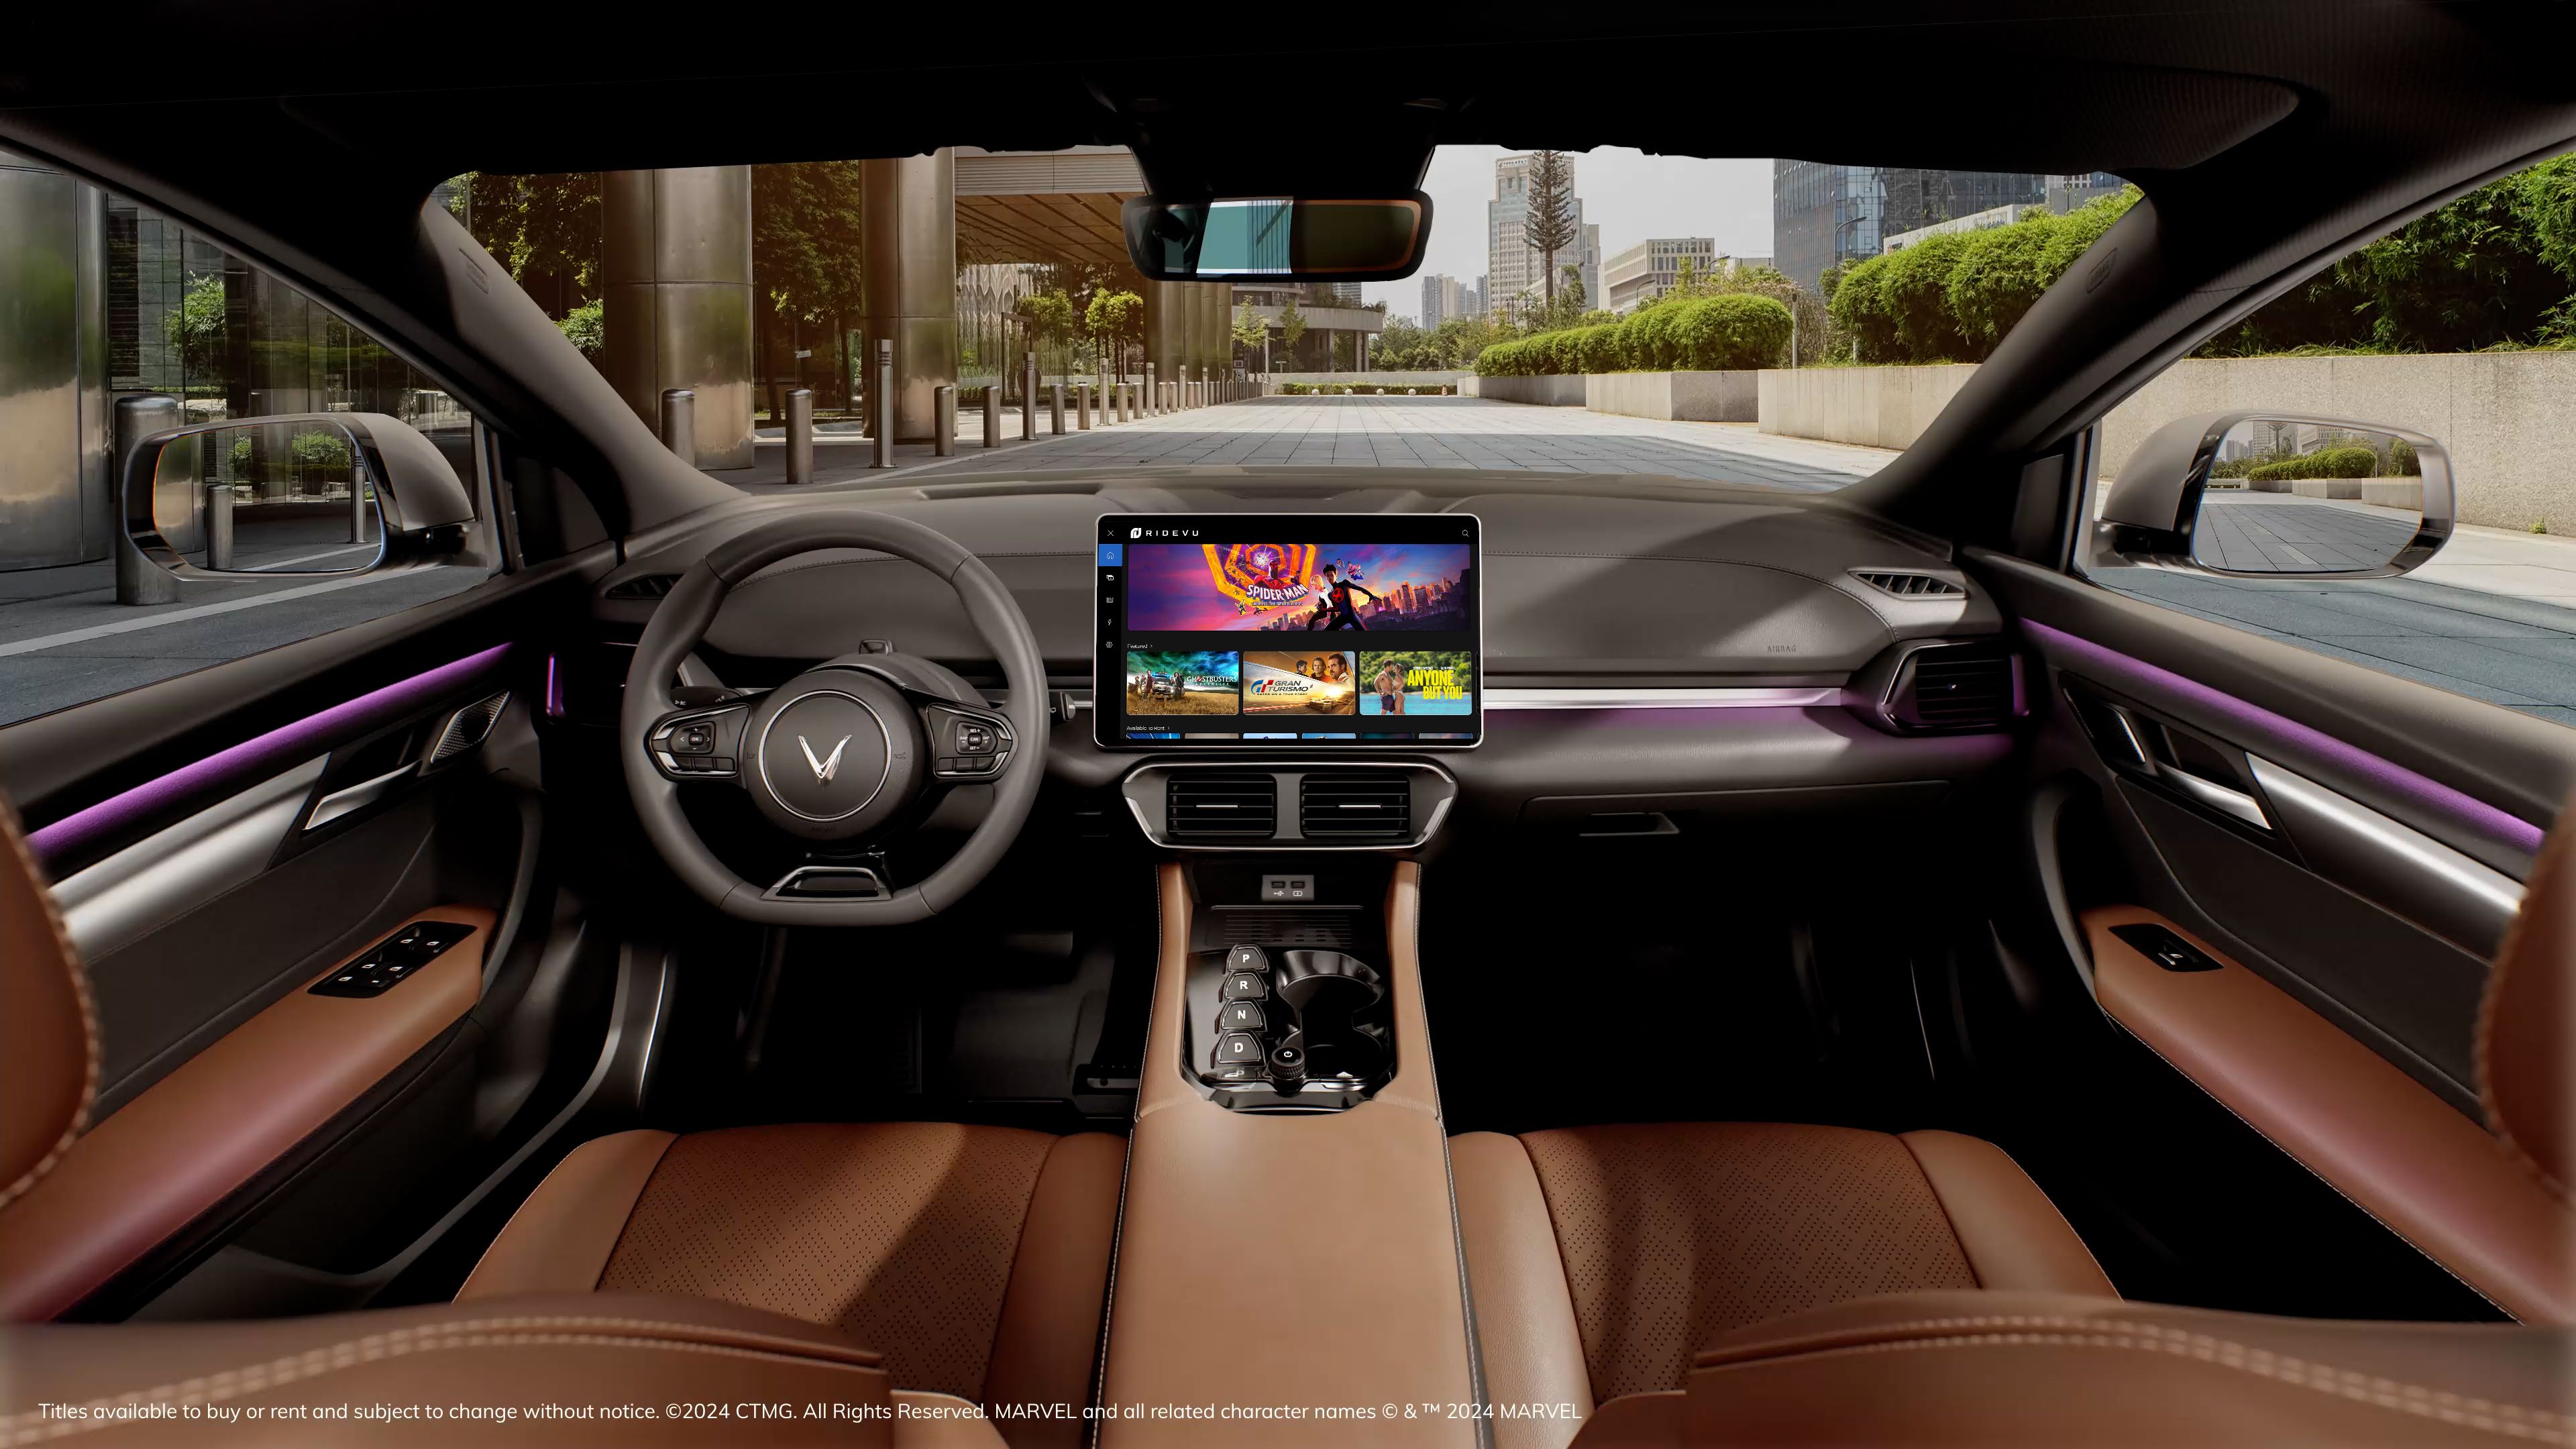 VinFast Becomes World’s First to Launch Sony’s In-Car Entertainment Service